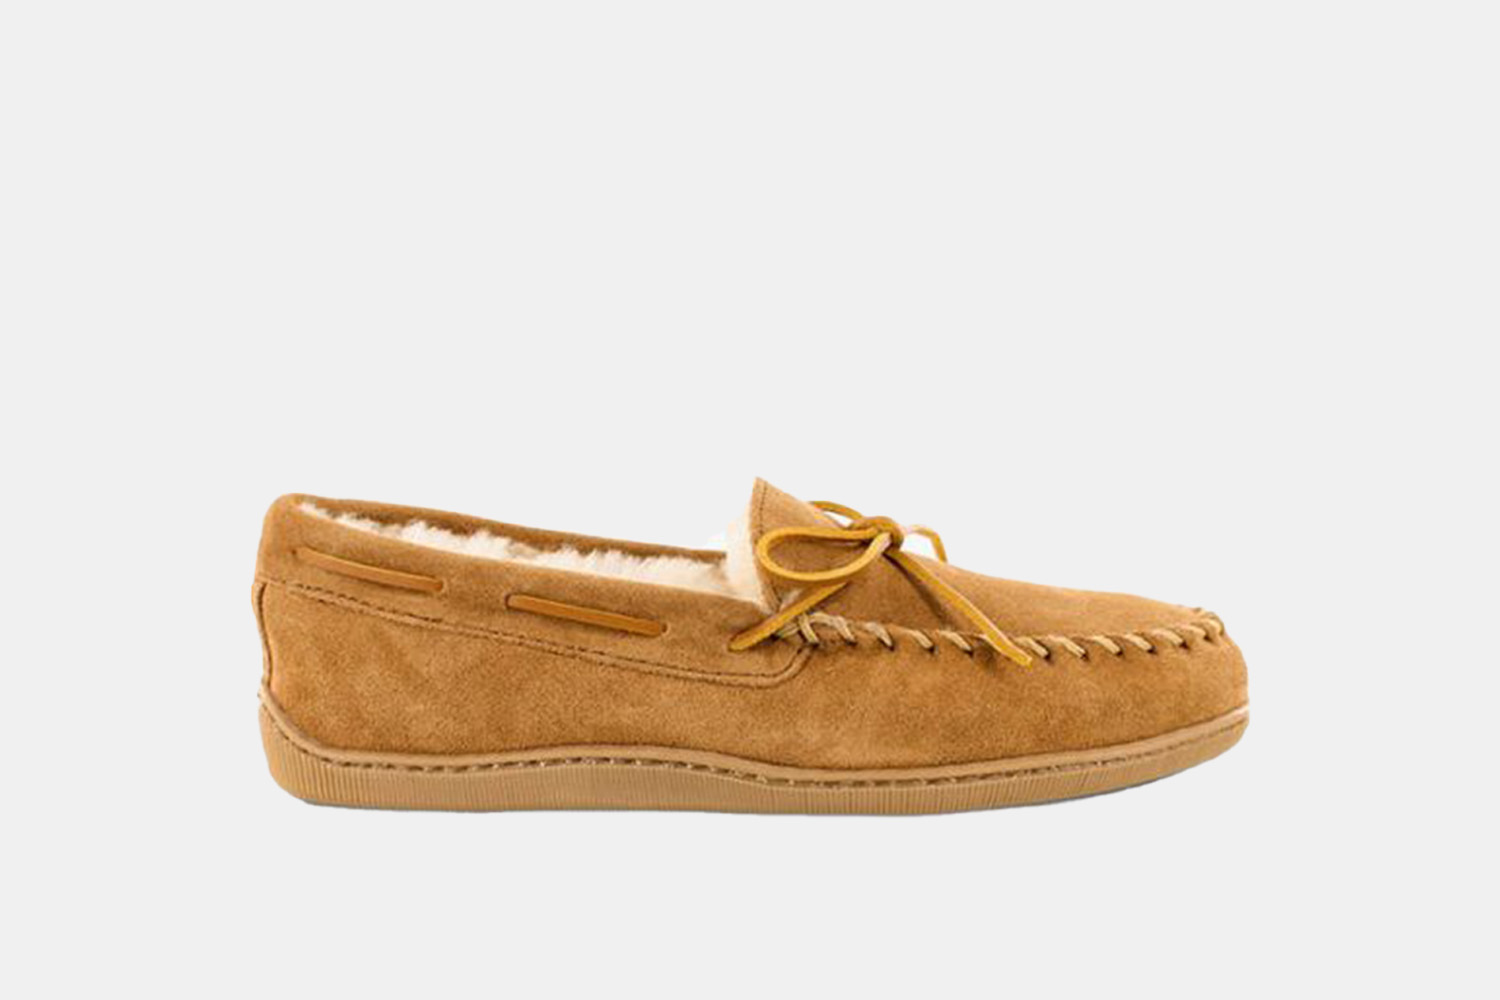 a classic shearling moccasin